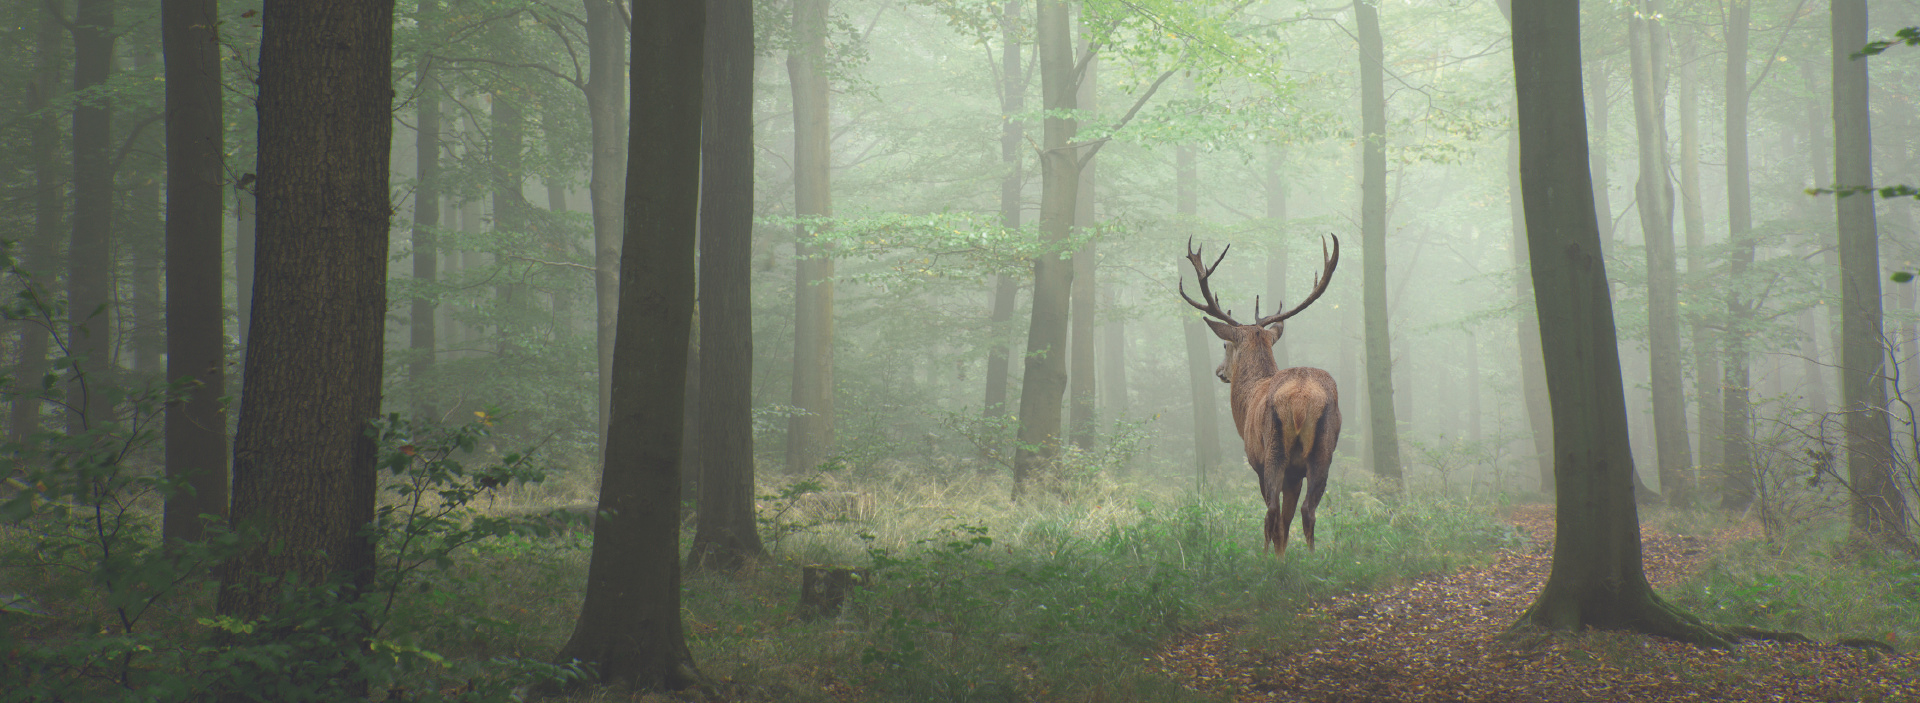 forest with deer